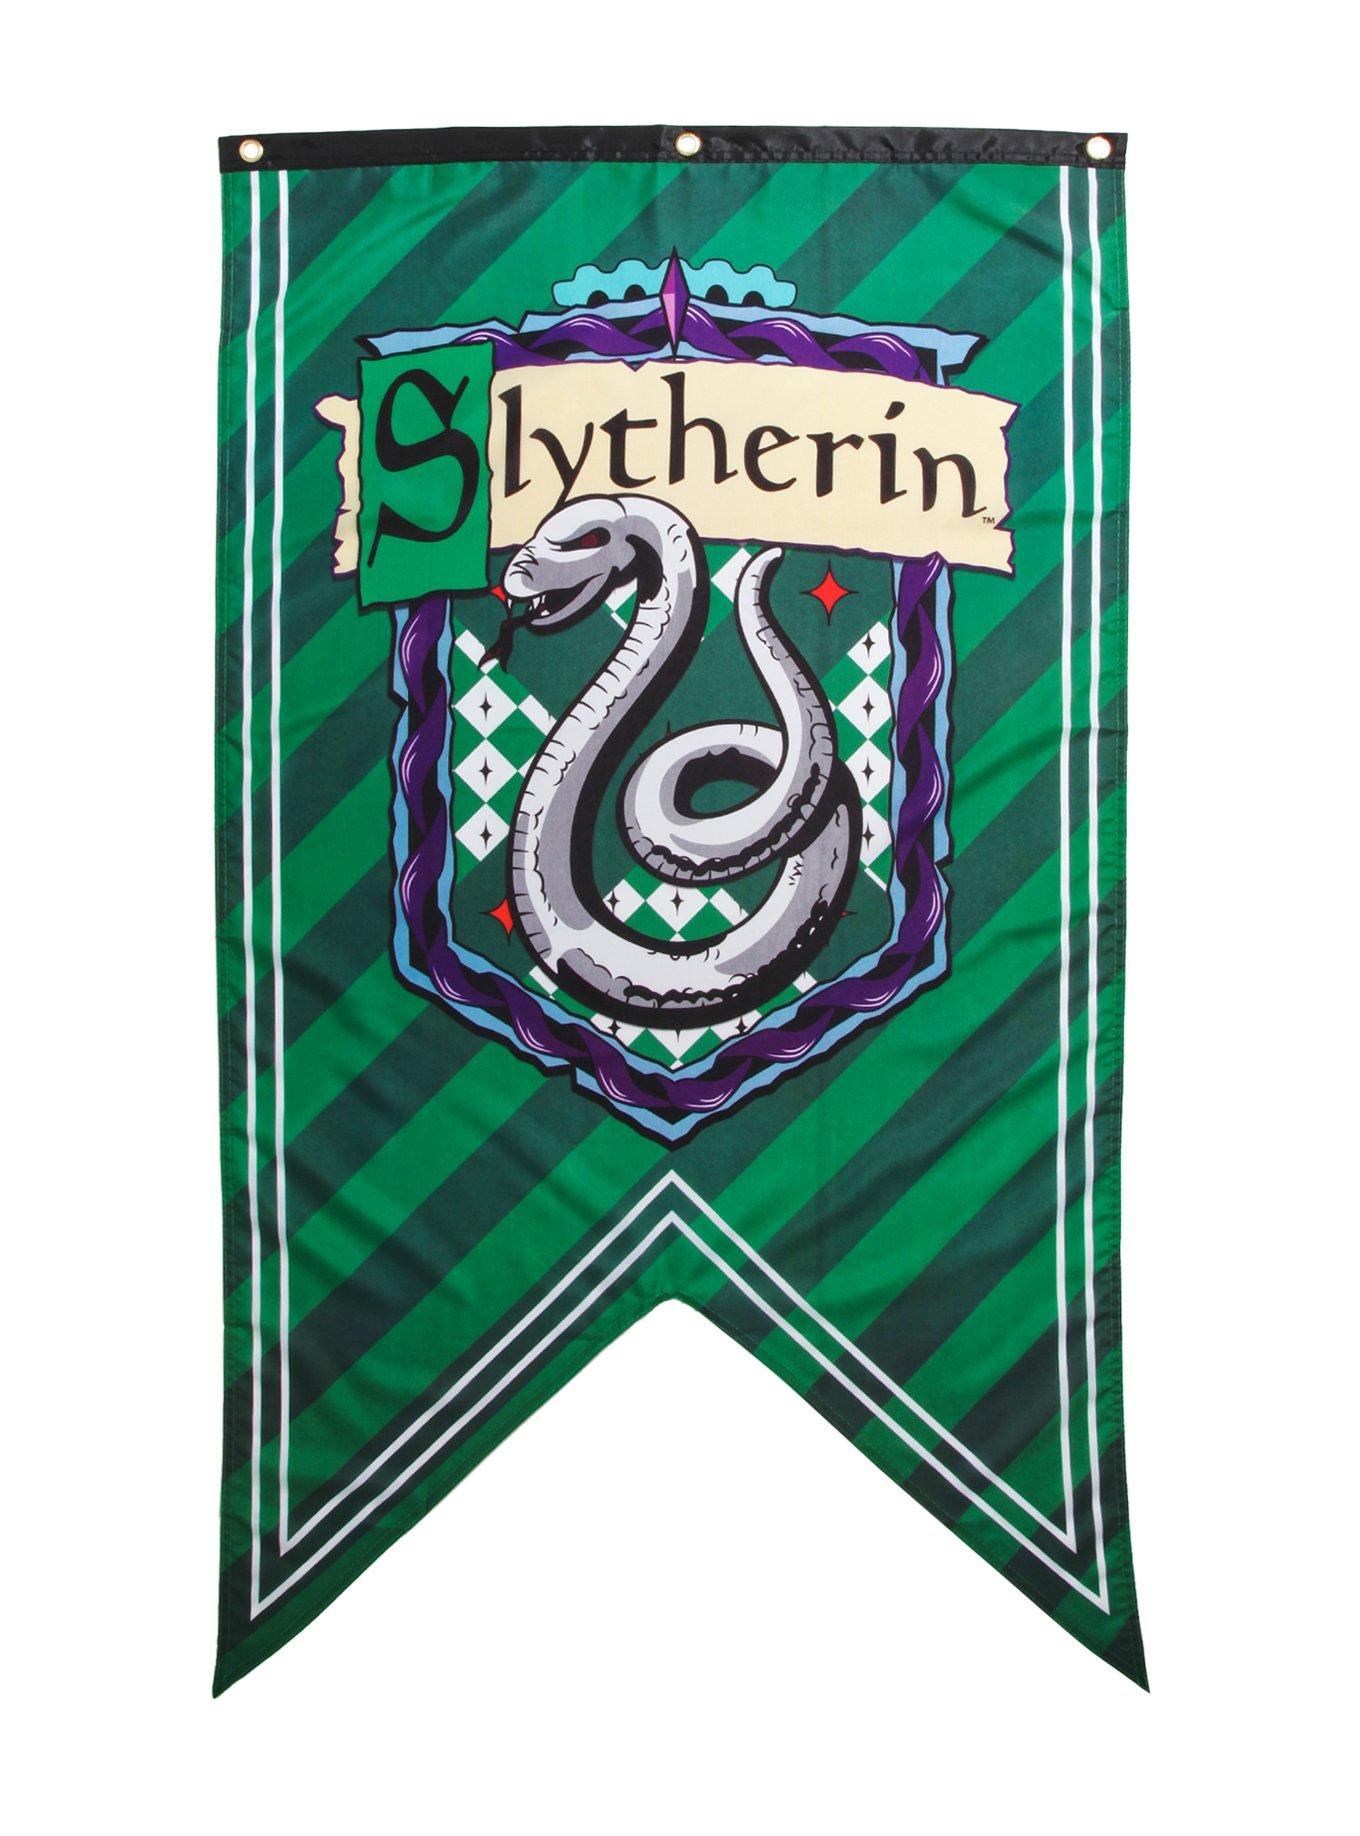 Harry Potter Slytherin Shield Banner Hot Topic Exclusive, , hi-res